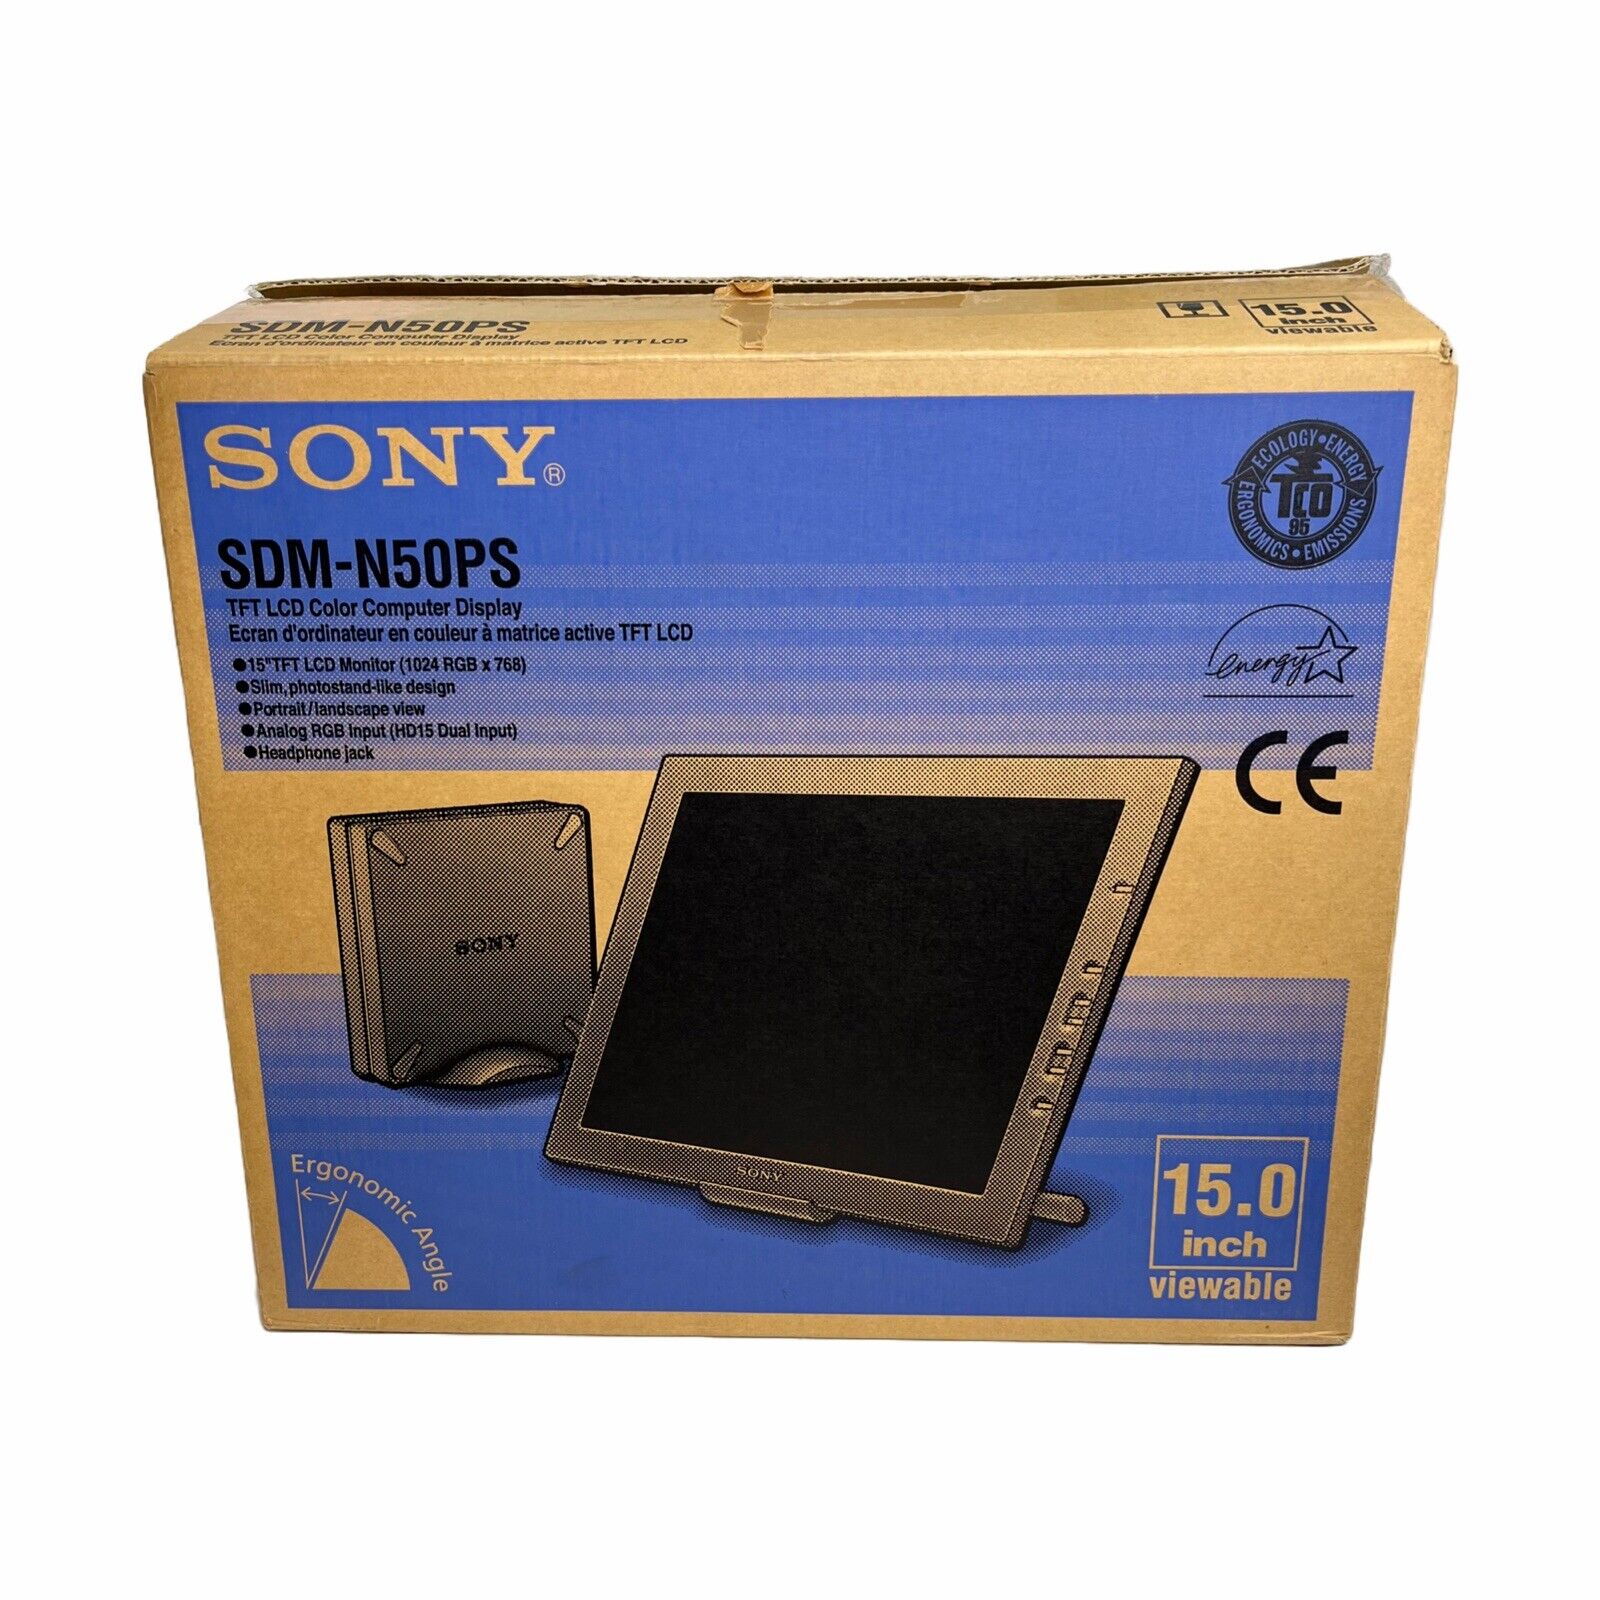 Sony SDM-N50PS Monitor TFT LCD Color Computer Display BOX WORKS GREAT W/MANUALS